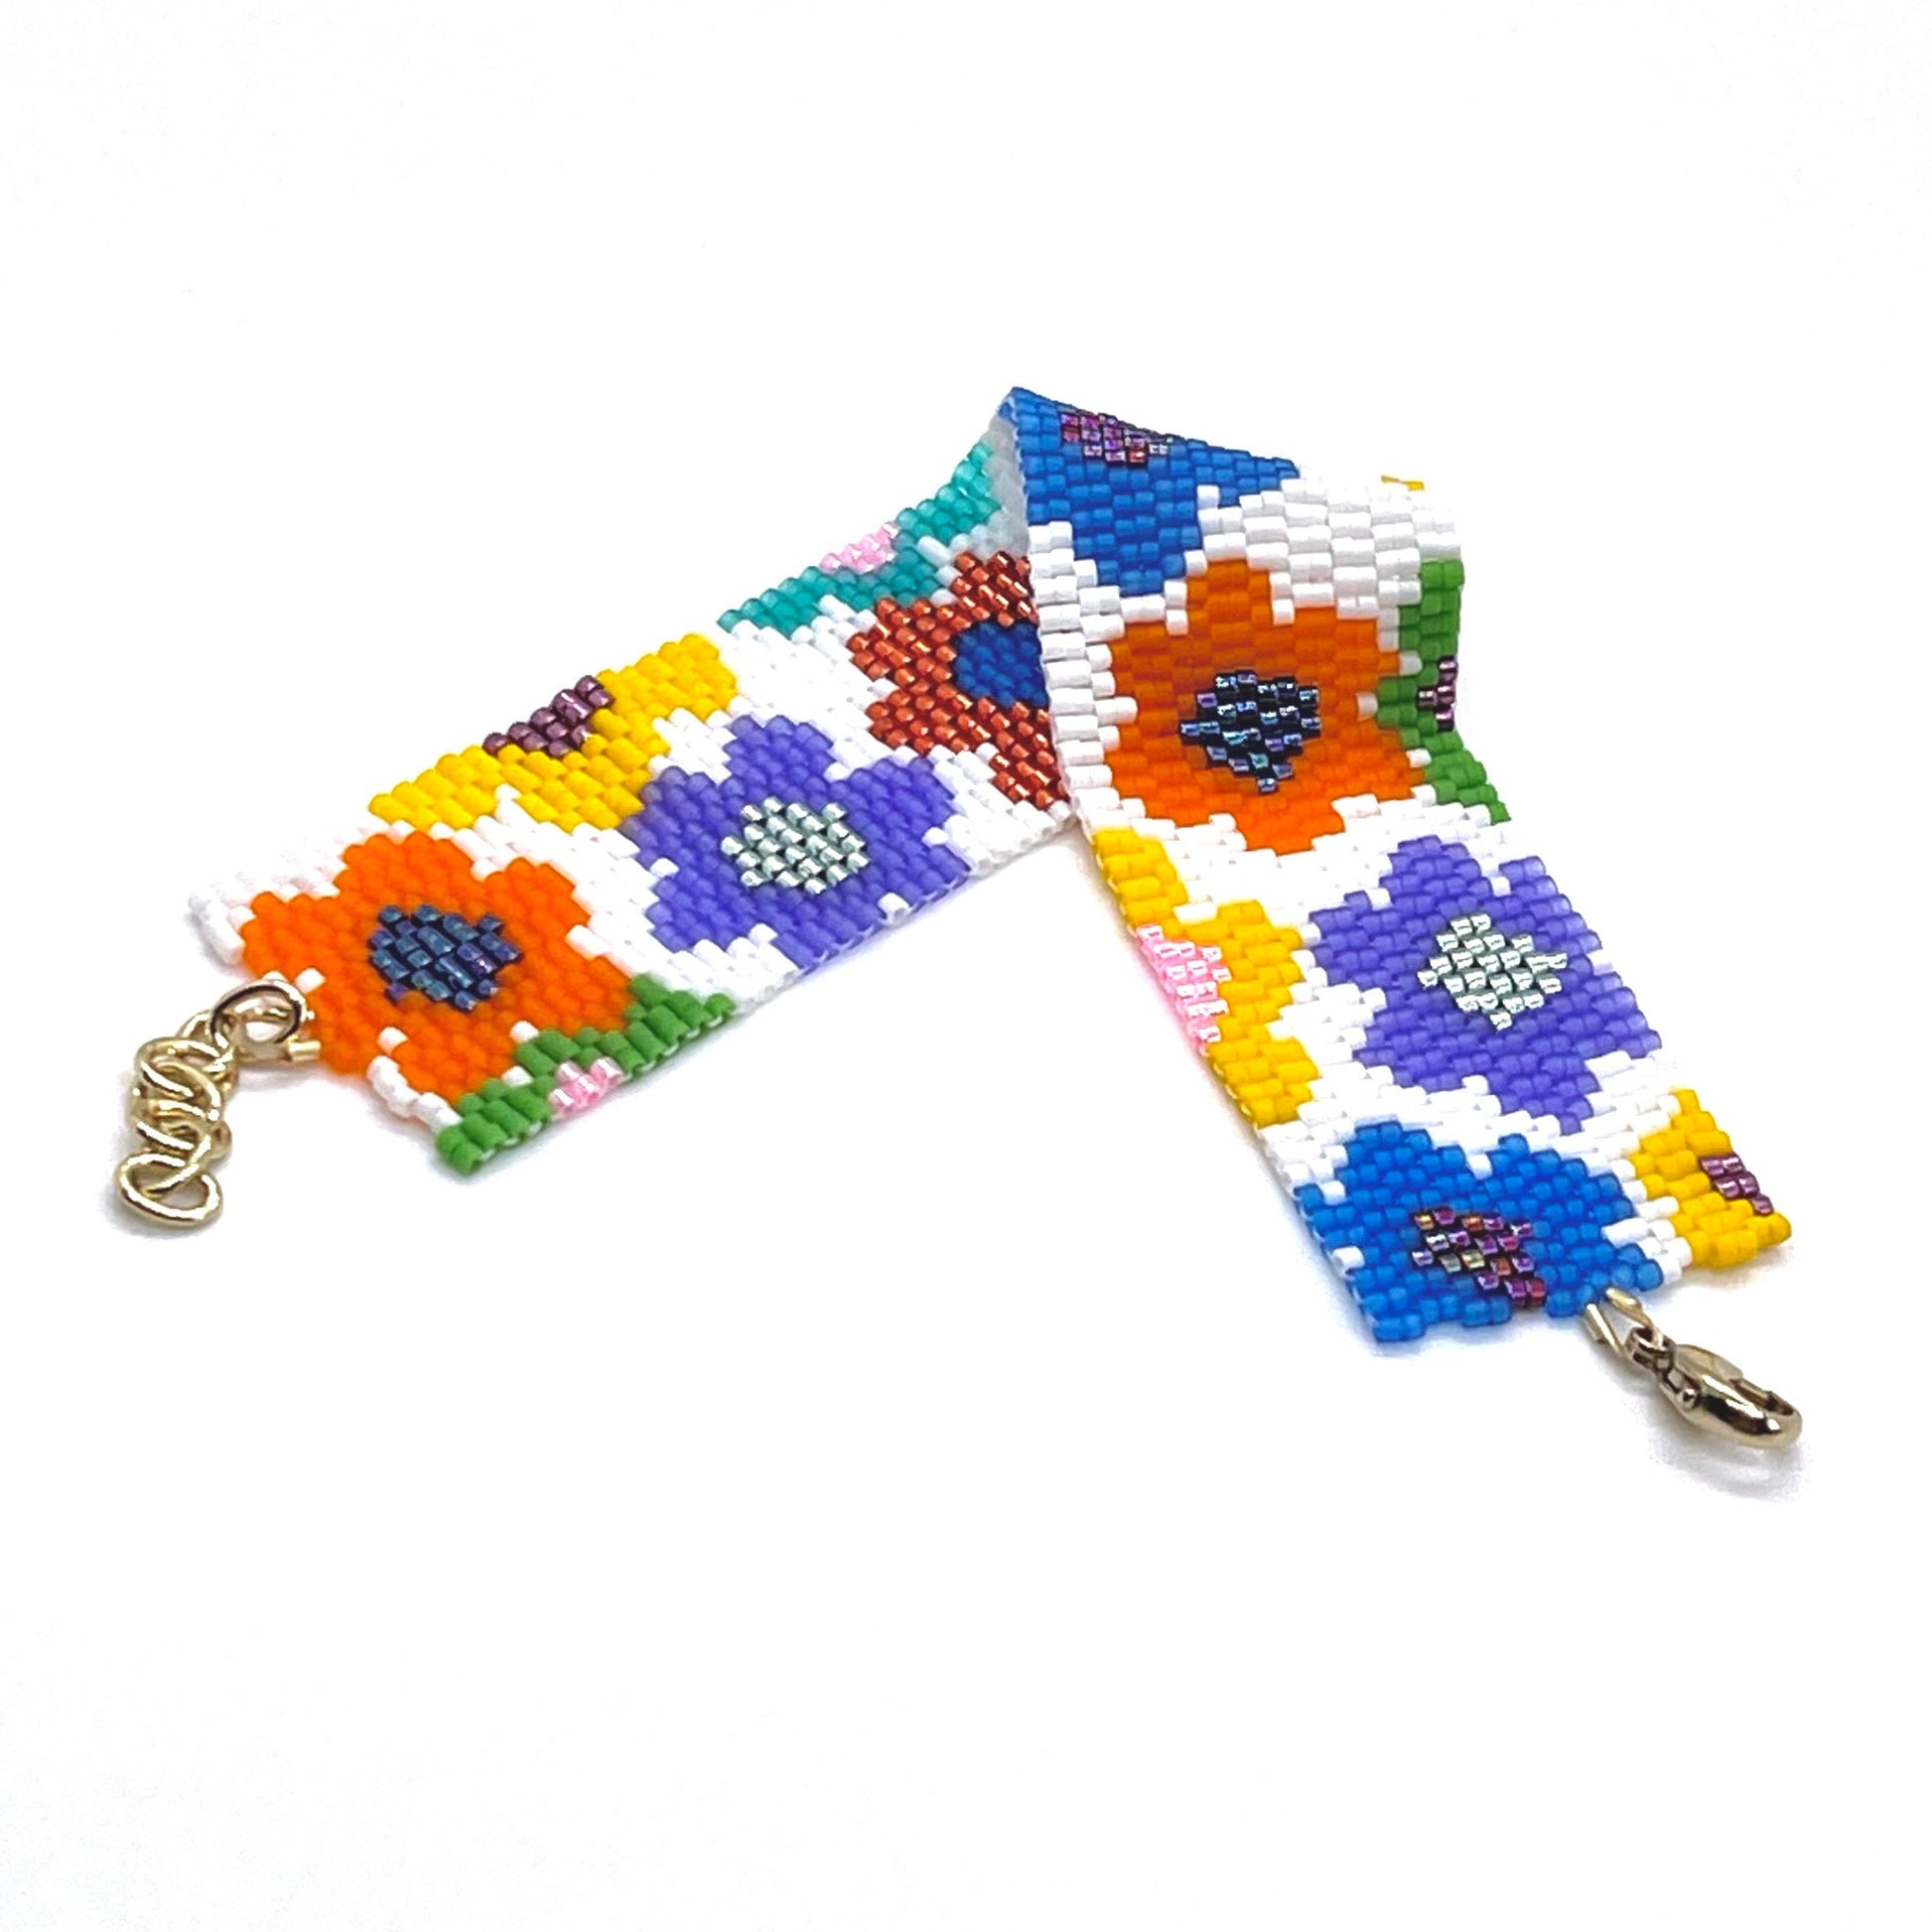 Flower bead bracelet band with white background and large bright multi color seed bead daisies.